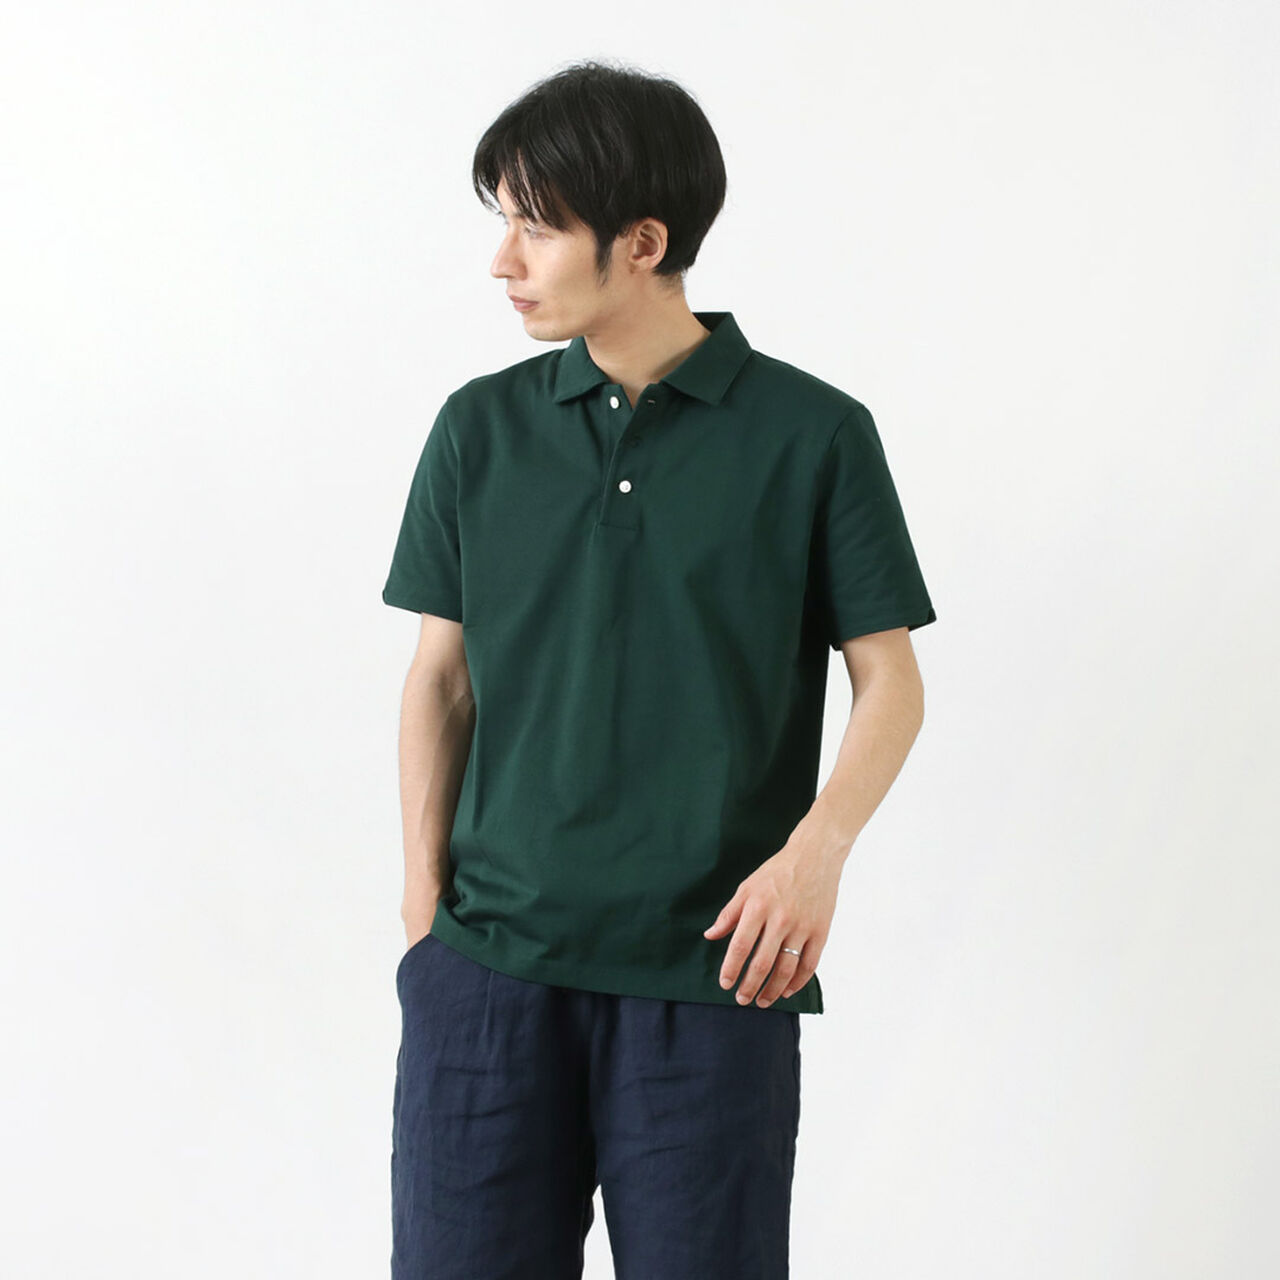 SUVIN GOLD COTTON KNIT SHIRT,Green, large image number 0